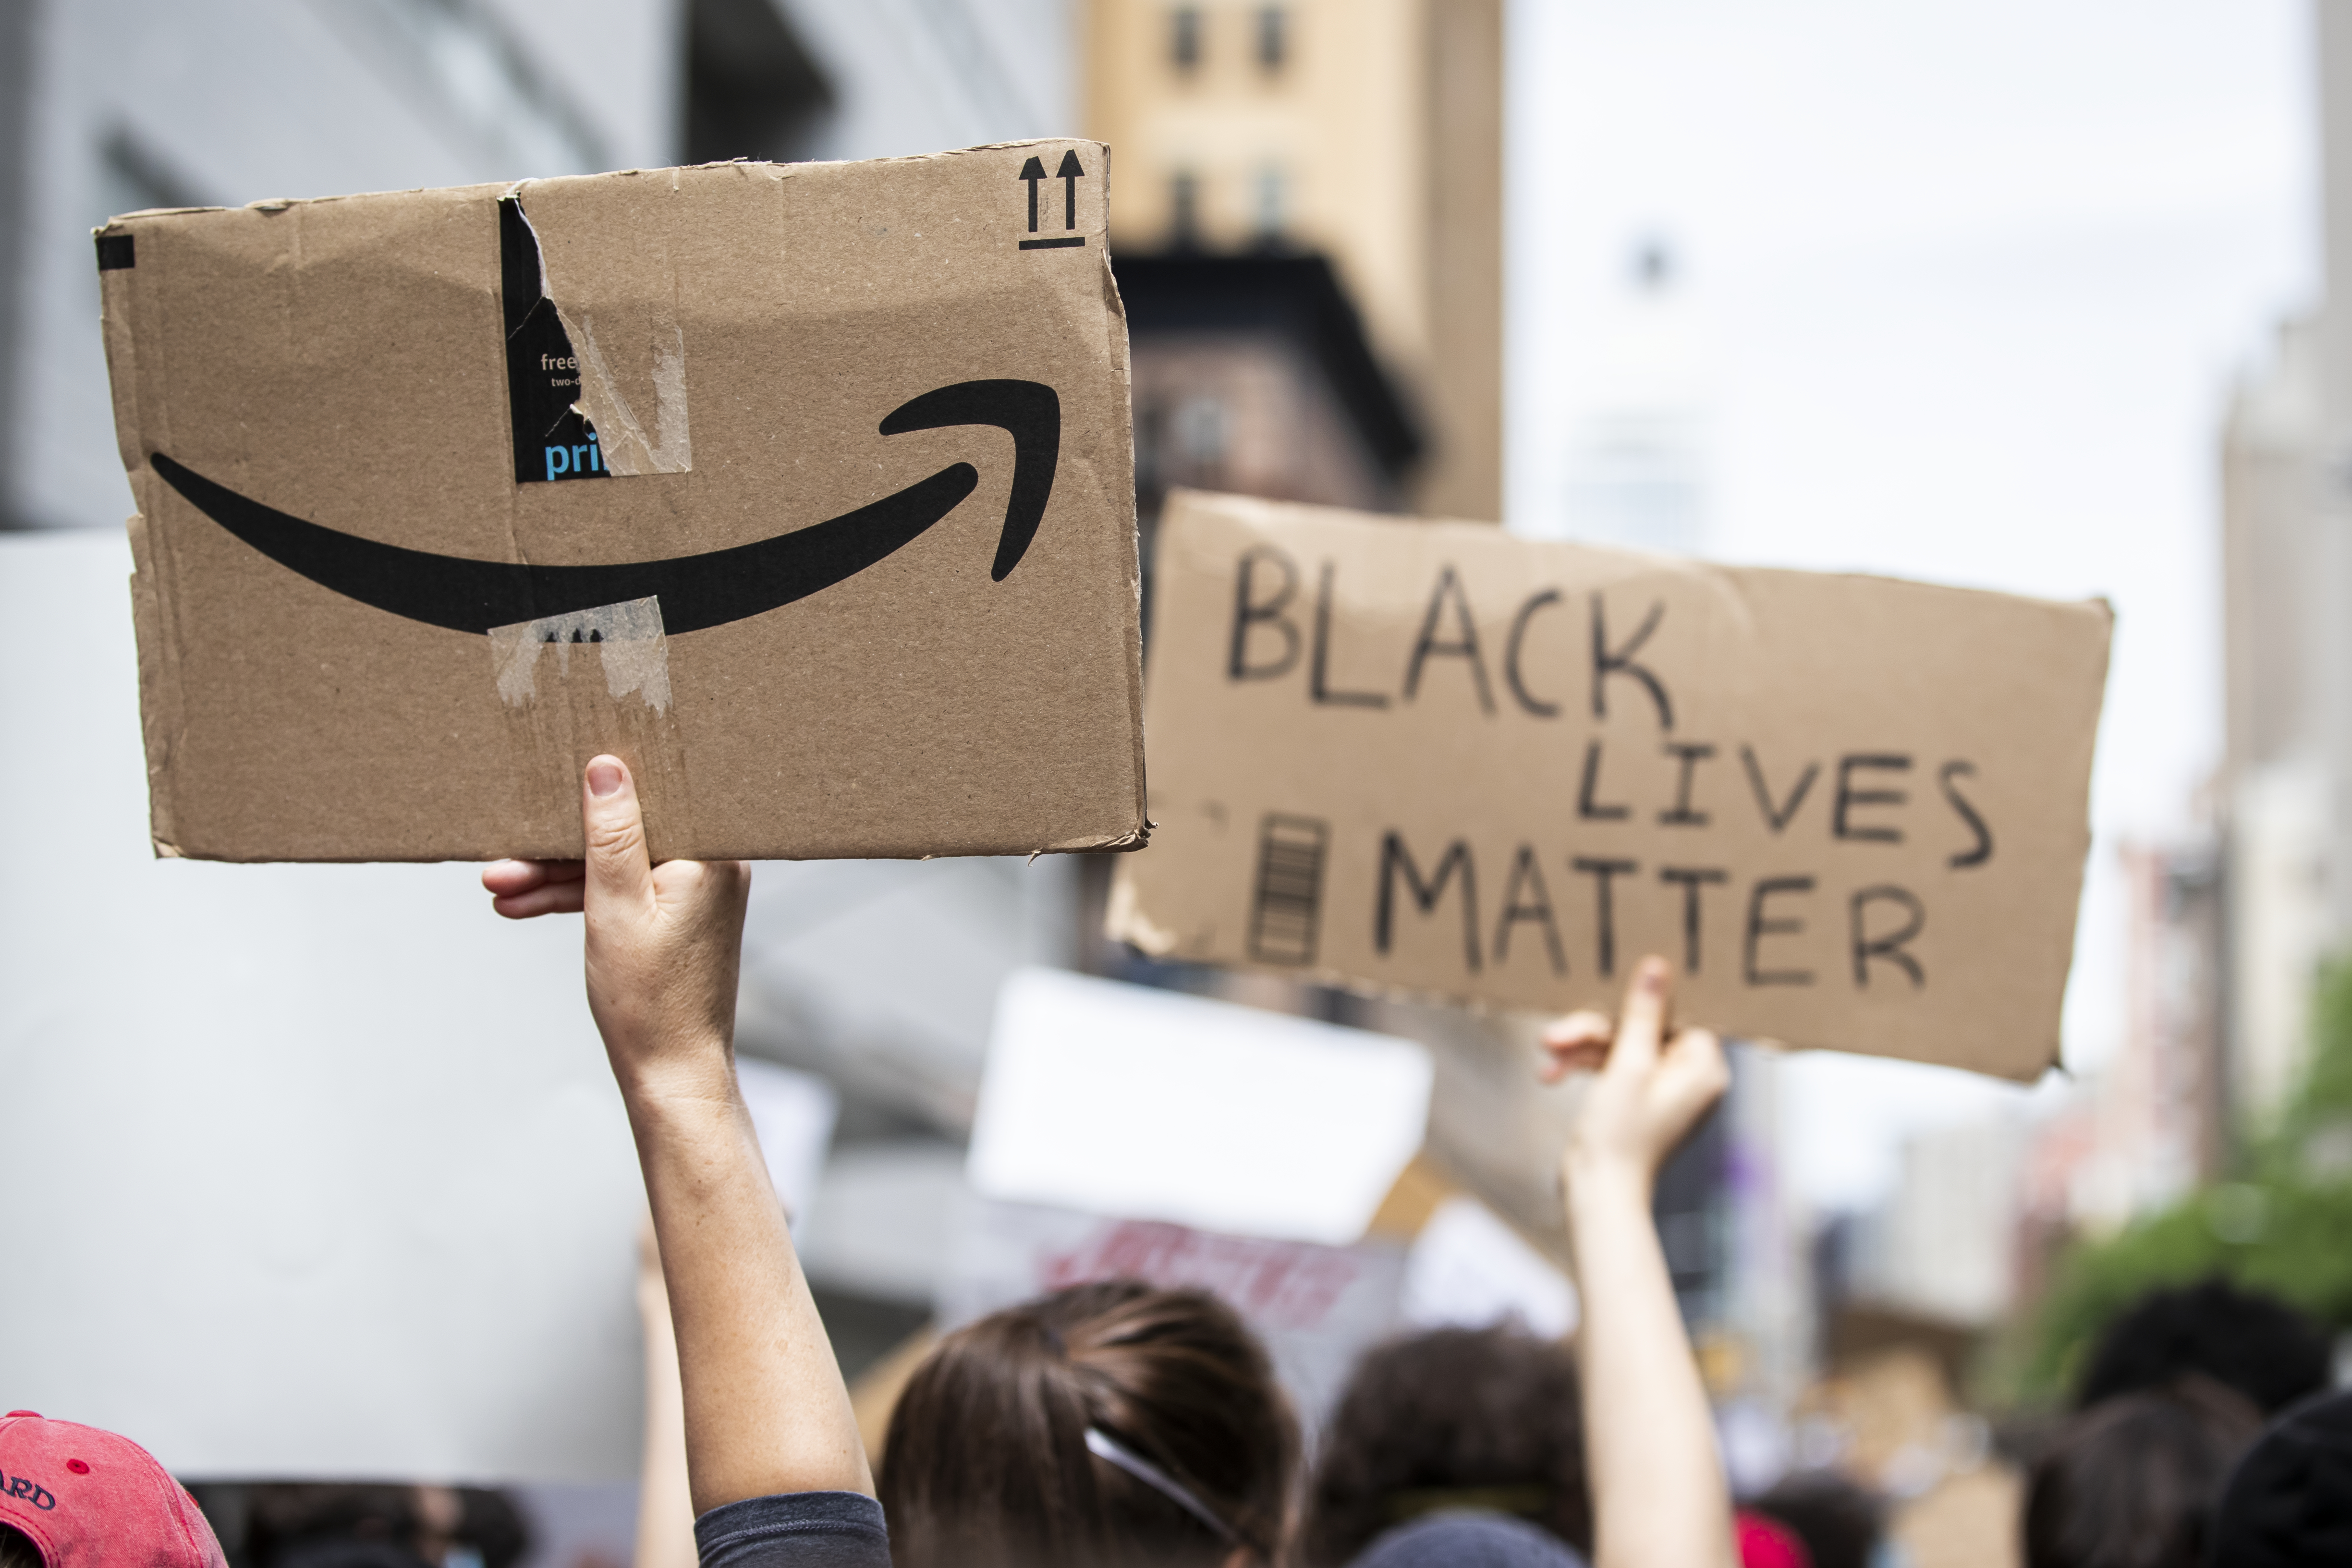 An Amazon logo on the back of a Black Lives Matter protest sign.